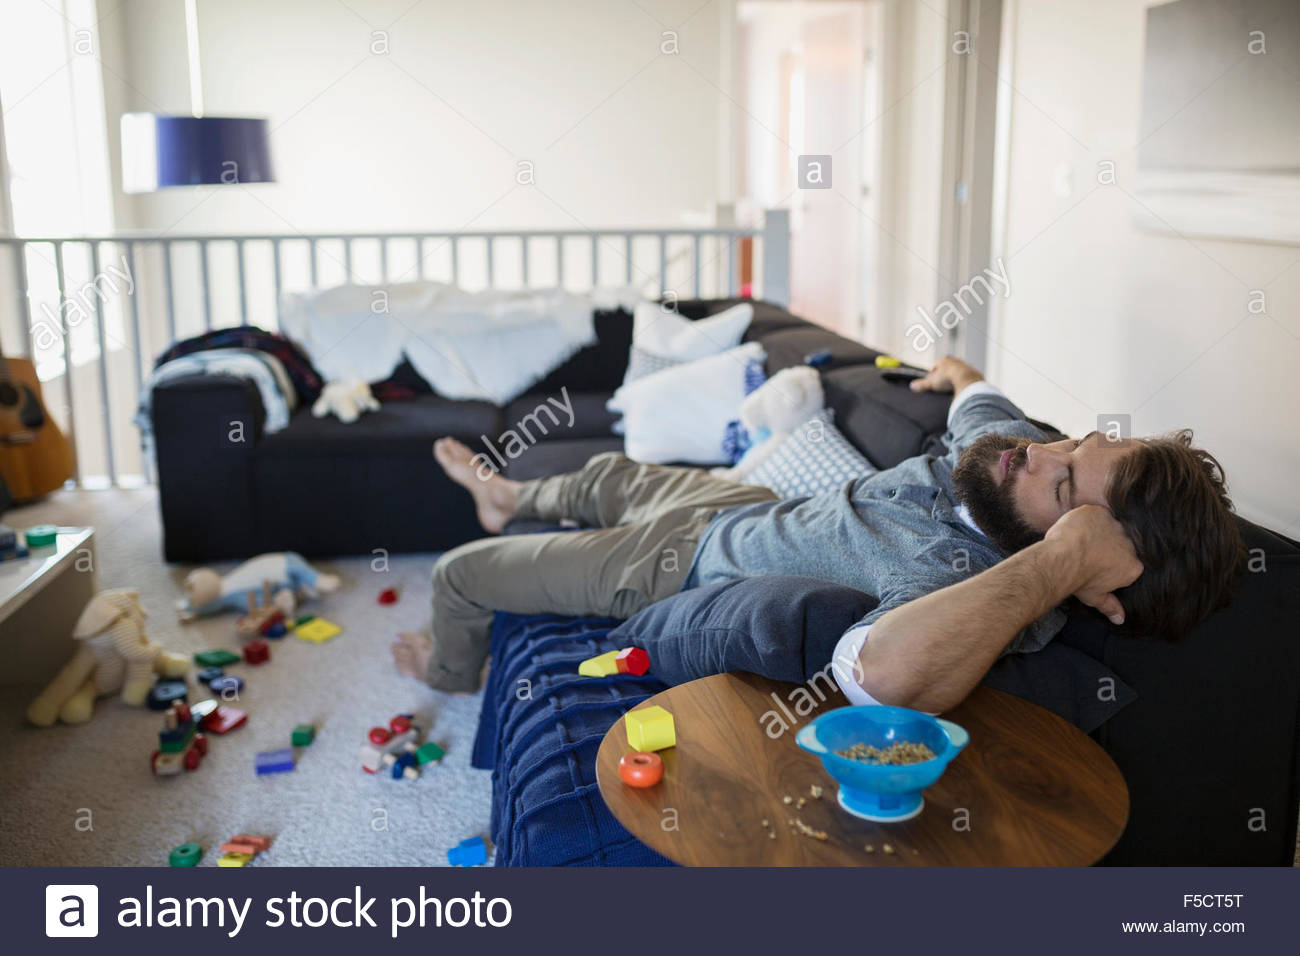 Exhausted man napping on sofa surrounded by toys Stock Photo